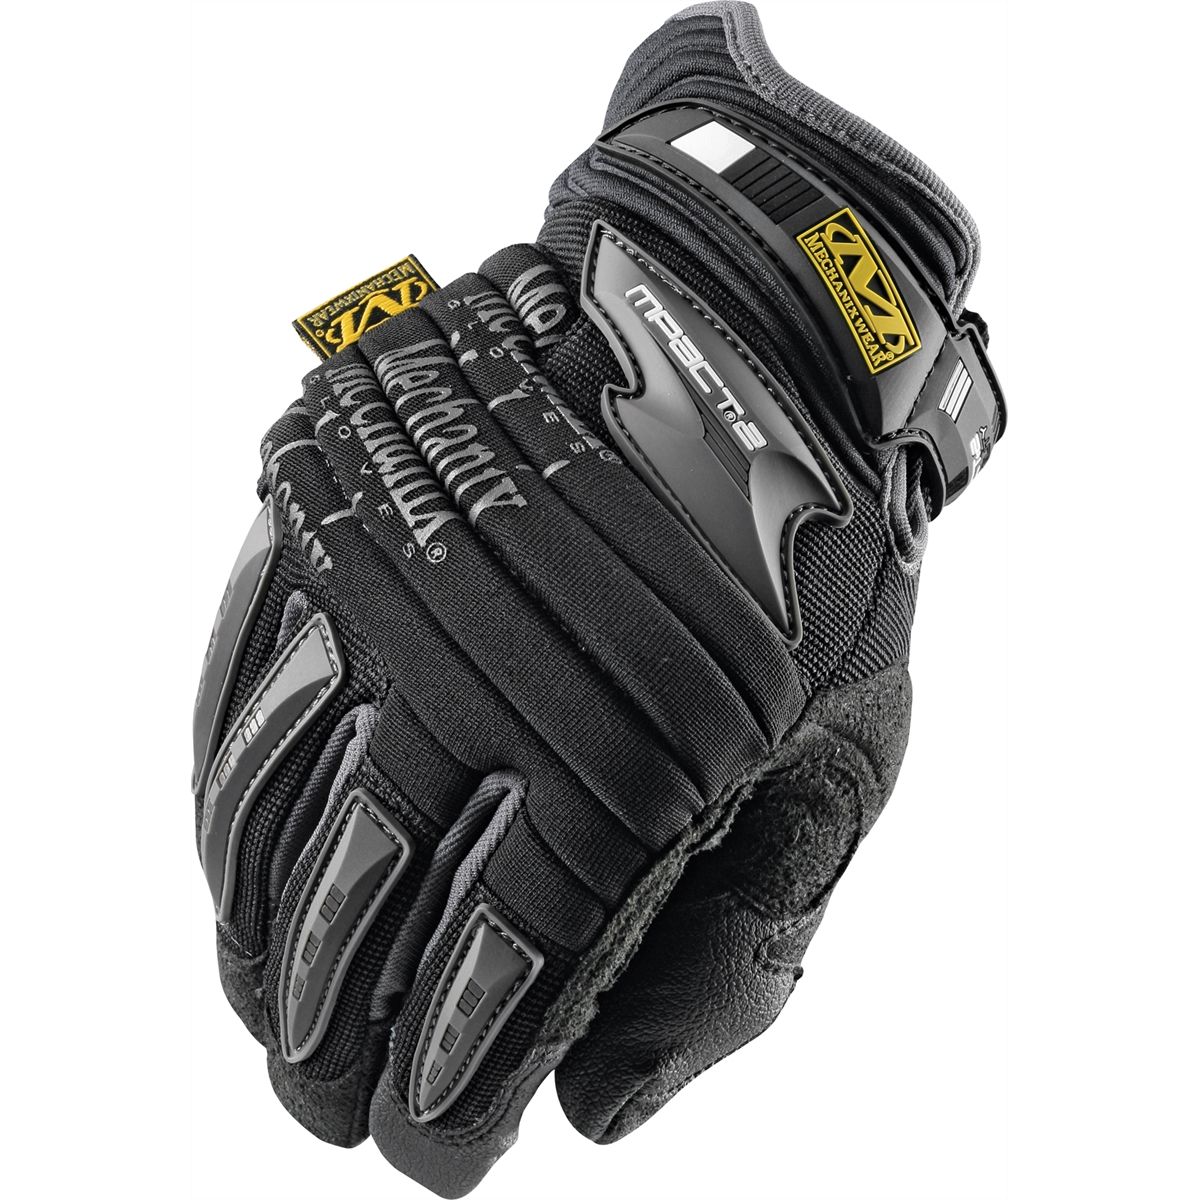 M-Pact II Gloves - Black - X-Large